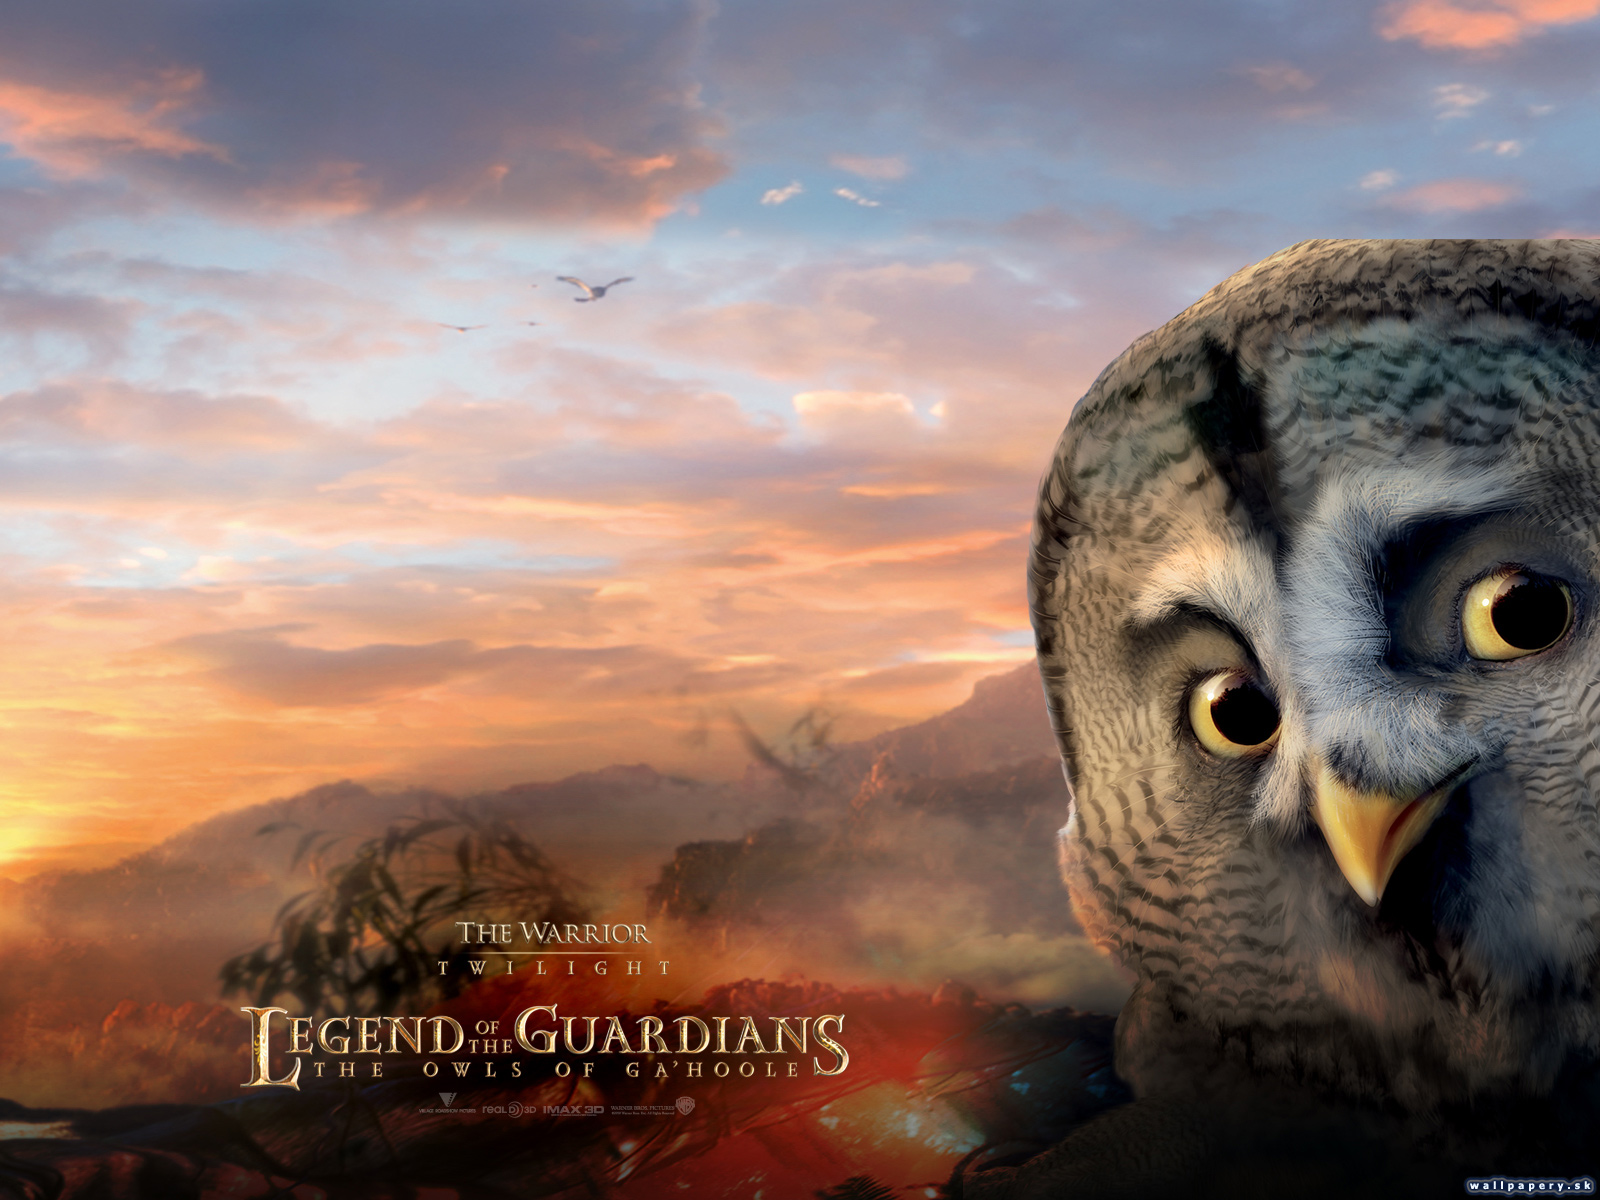 Legend of the Guardians: The Owls of Ga'Hoole - wallpaper 11